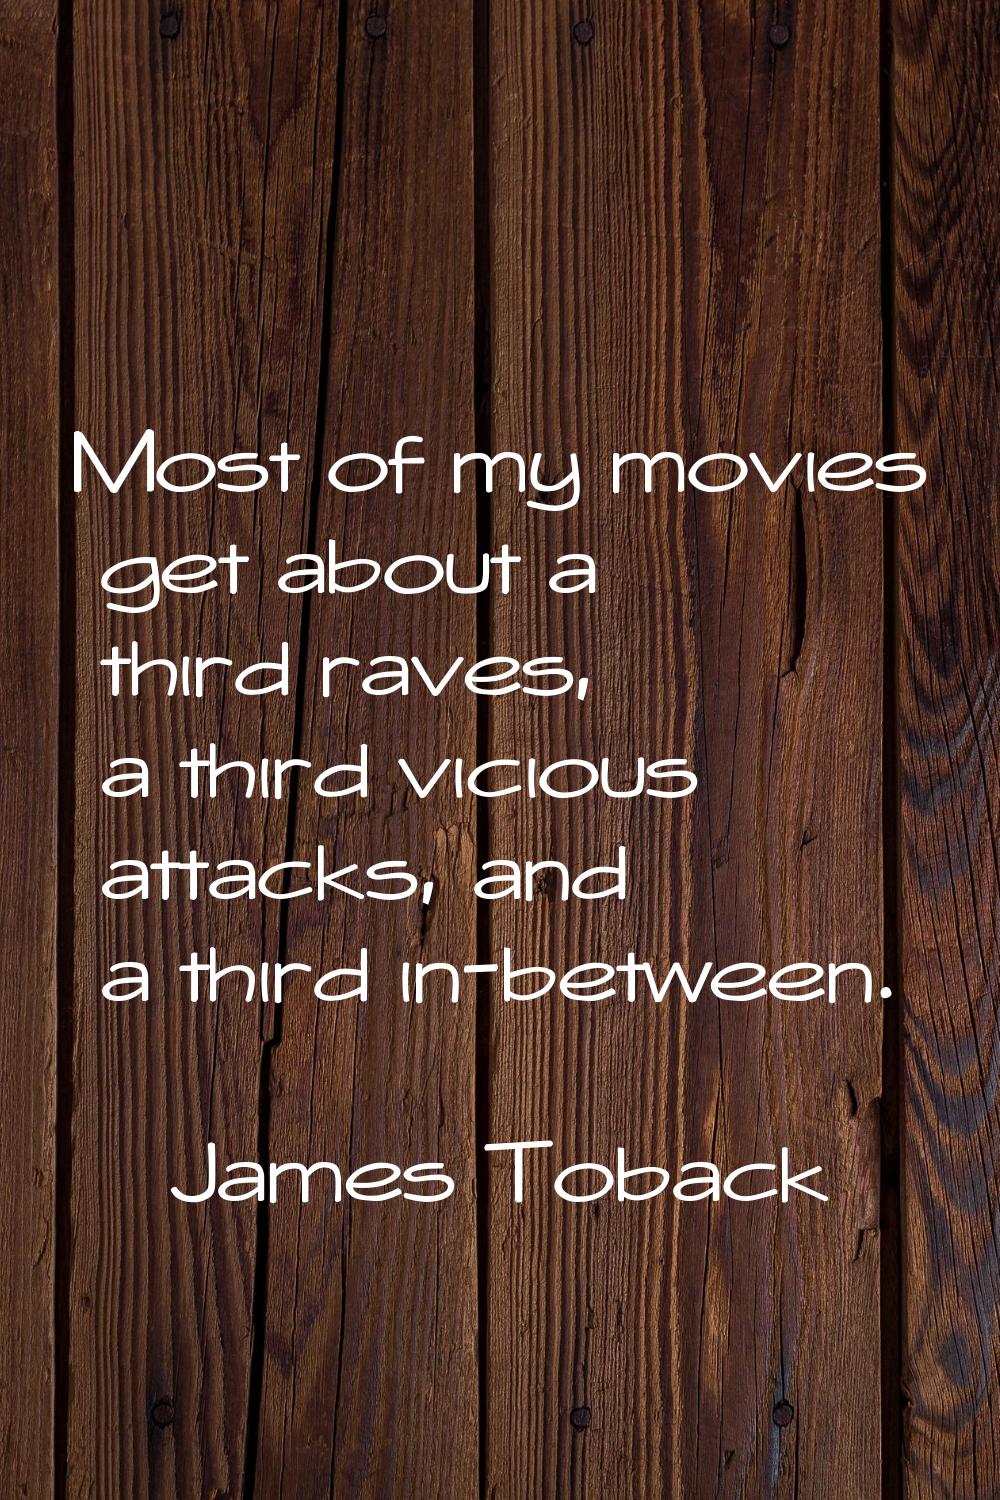 Most of my movies get about a third raves, a third vicious attacks, and a third in-between.